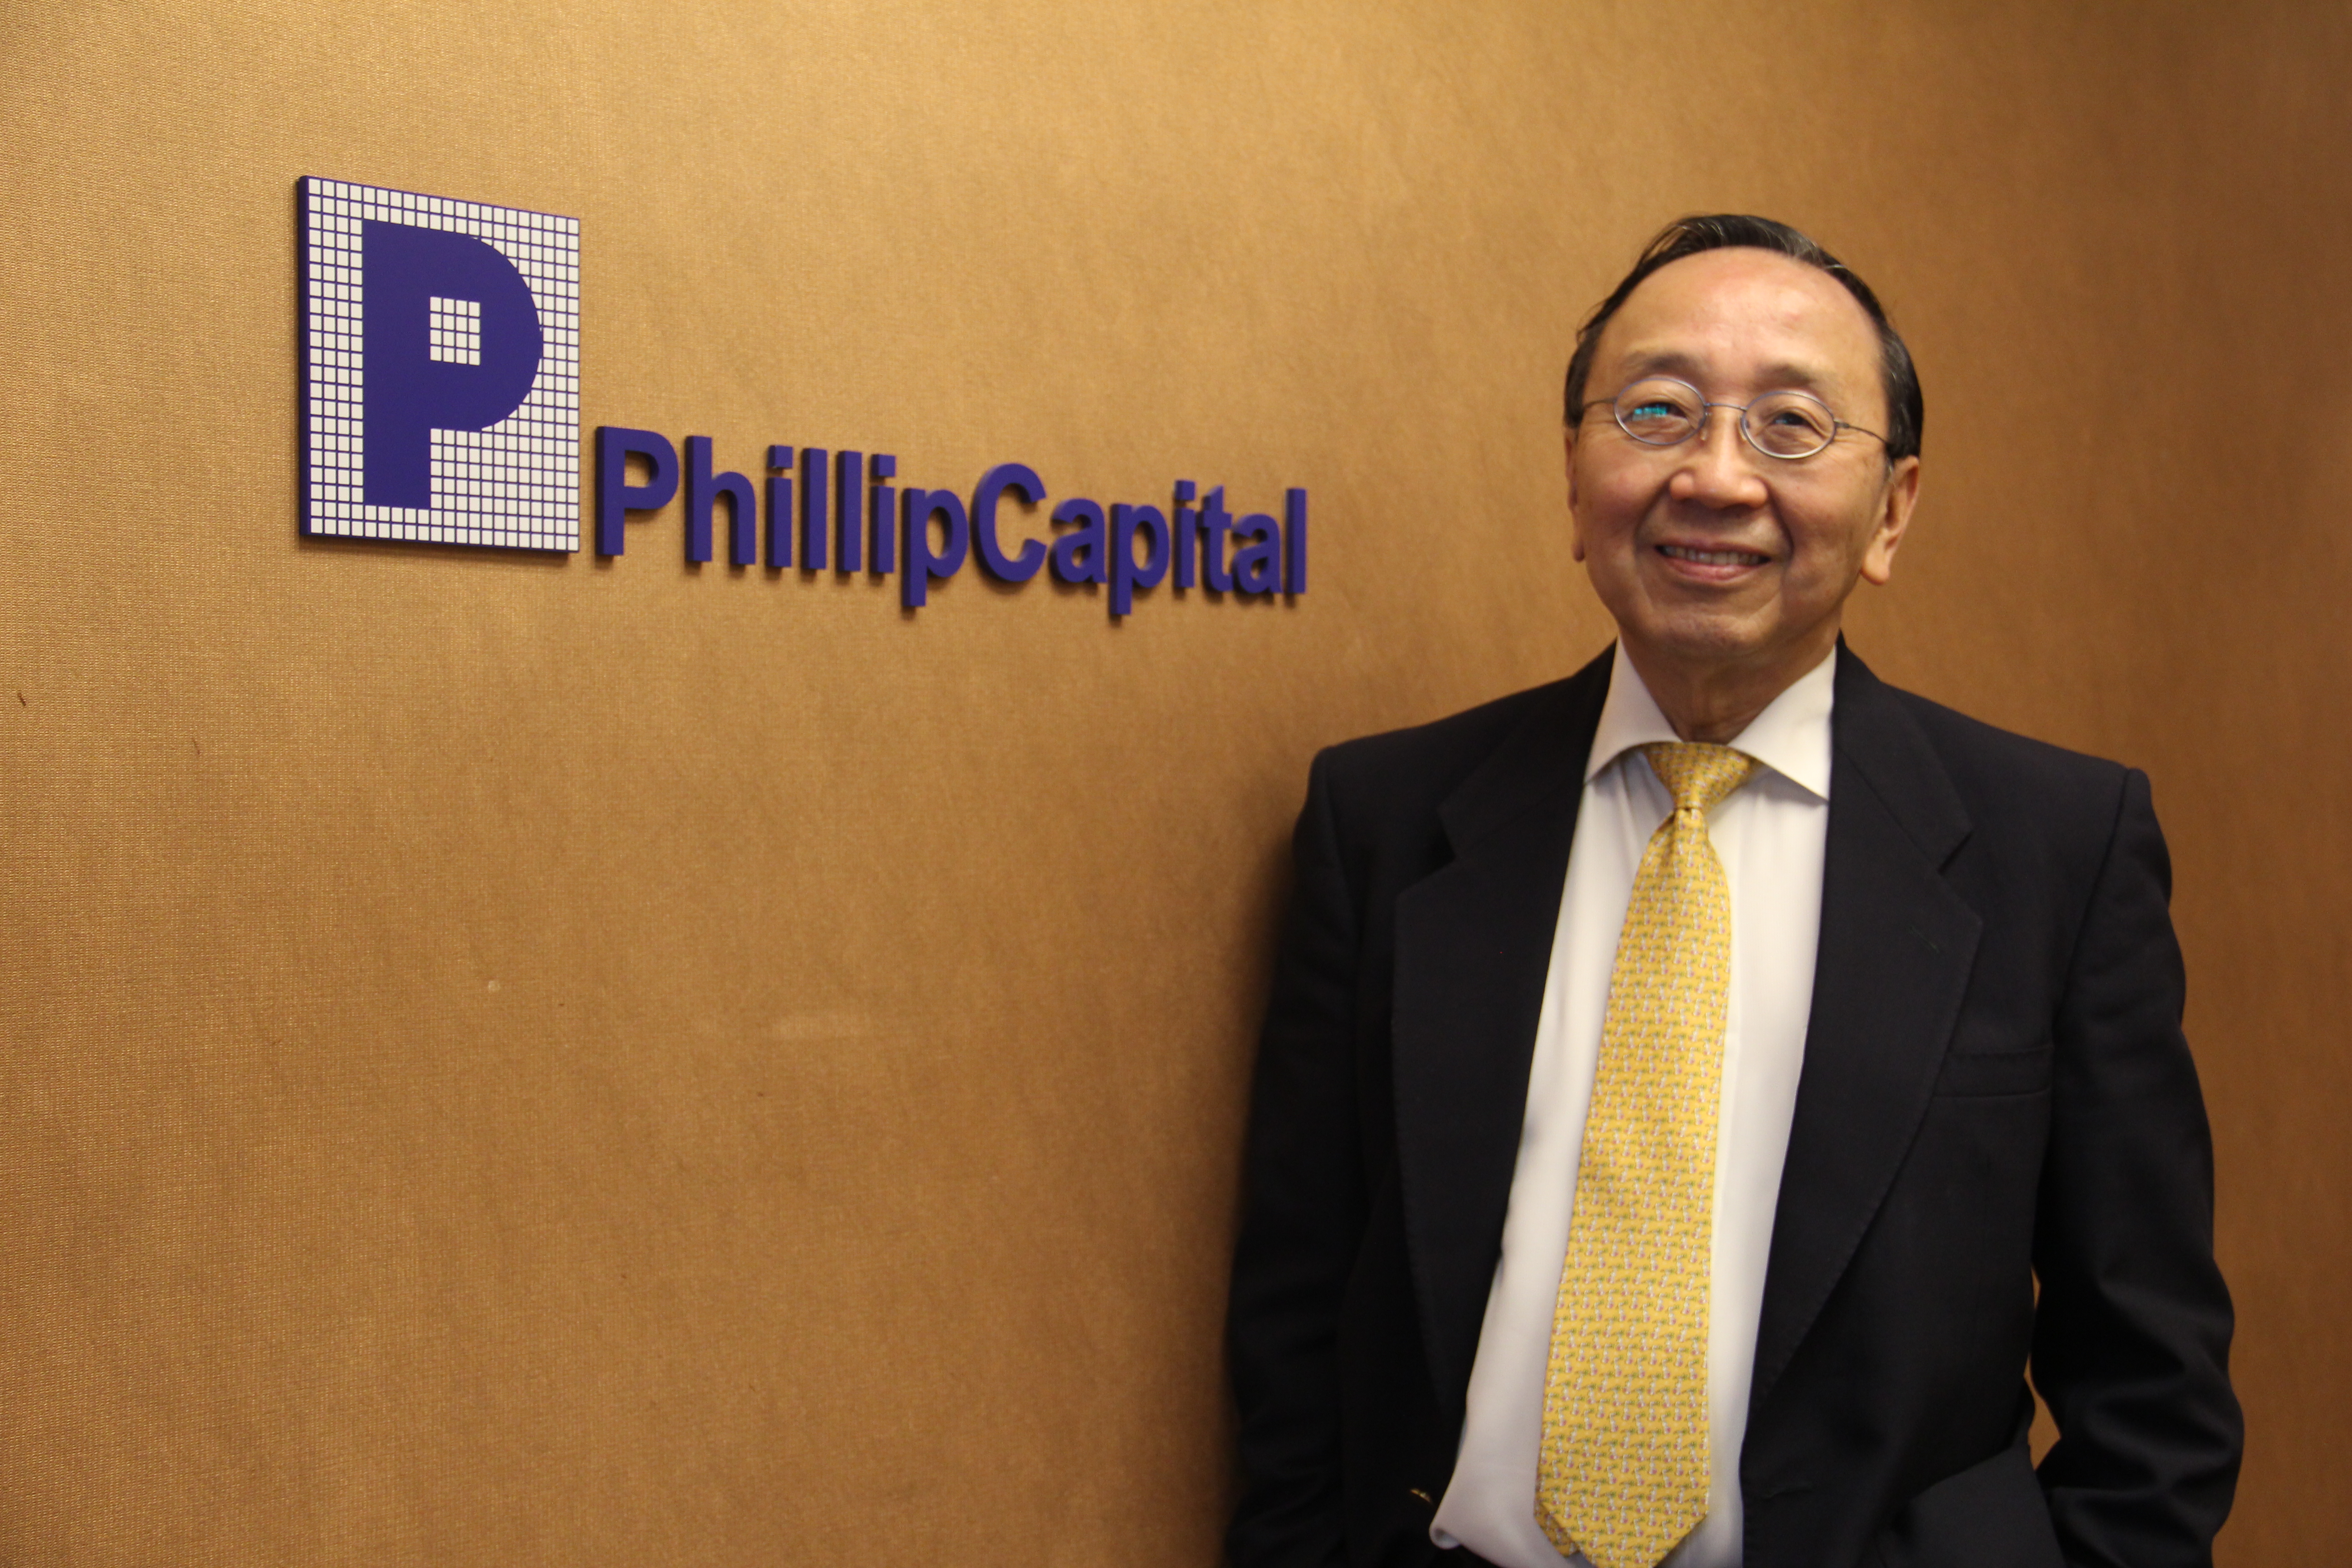 PhillipCapital Chairman Awarded Singapore Businessman of the Year